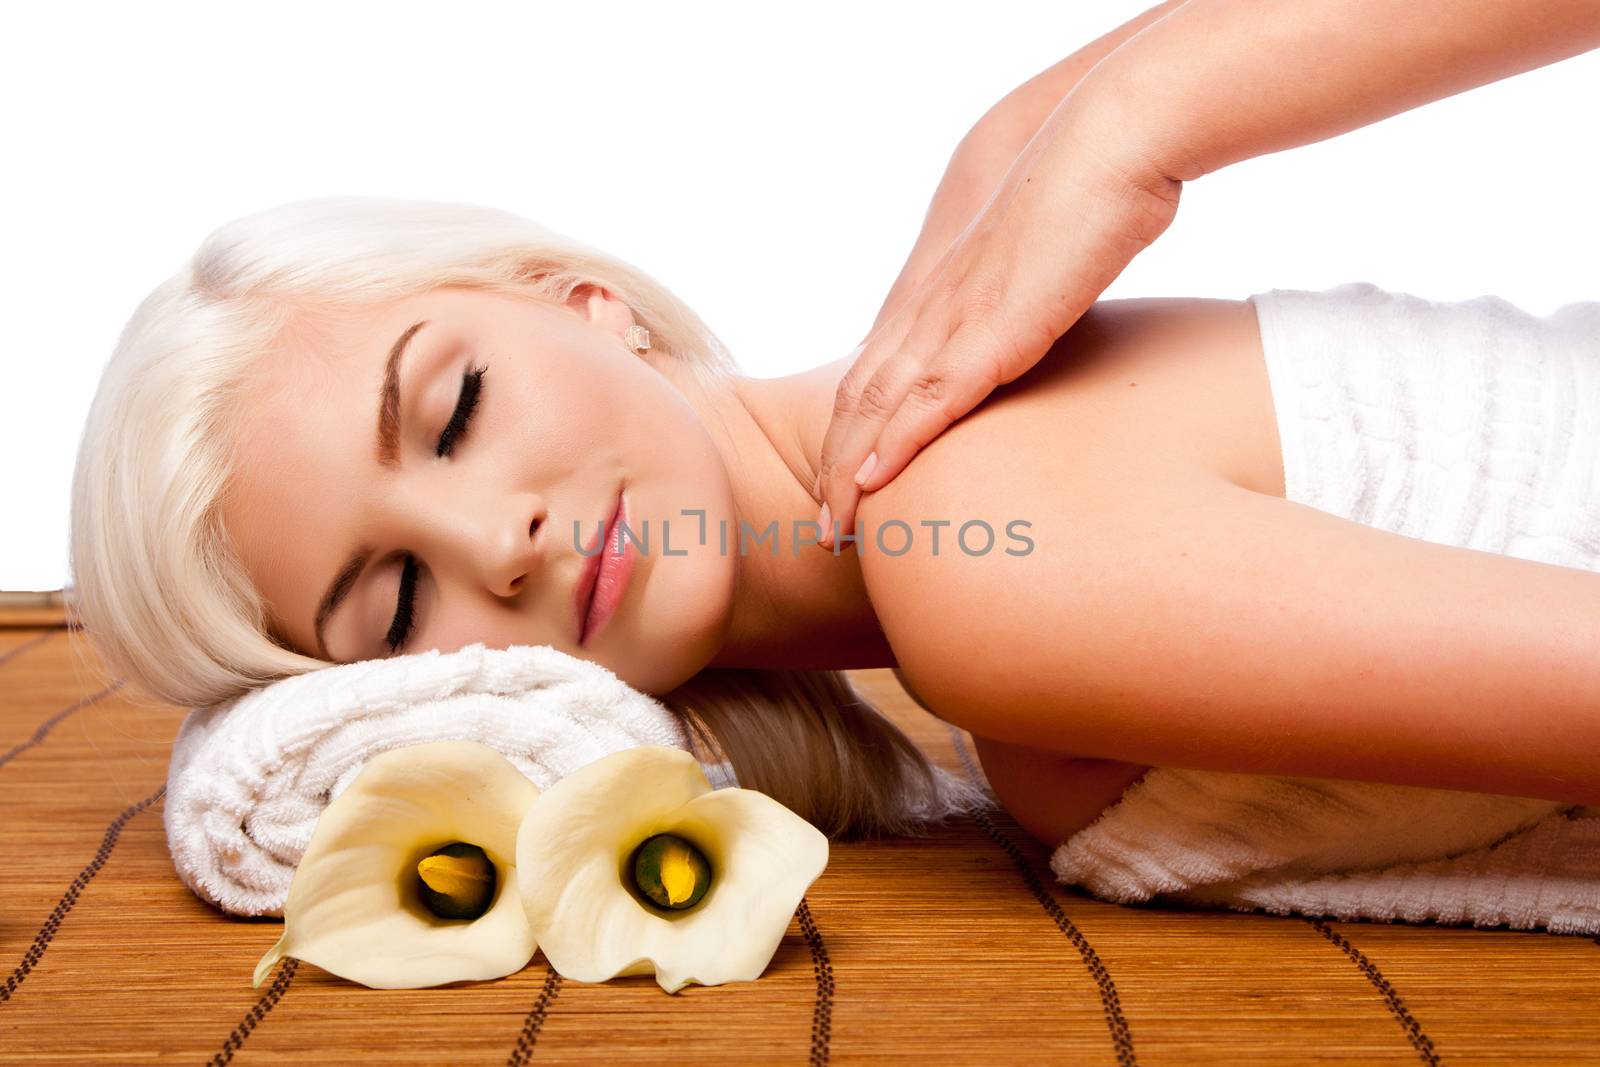 Beautiful young woman relaxing at spa getting therapeutic pampering shoulder massage.